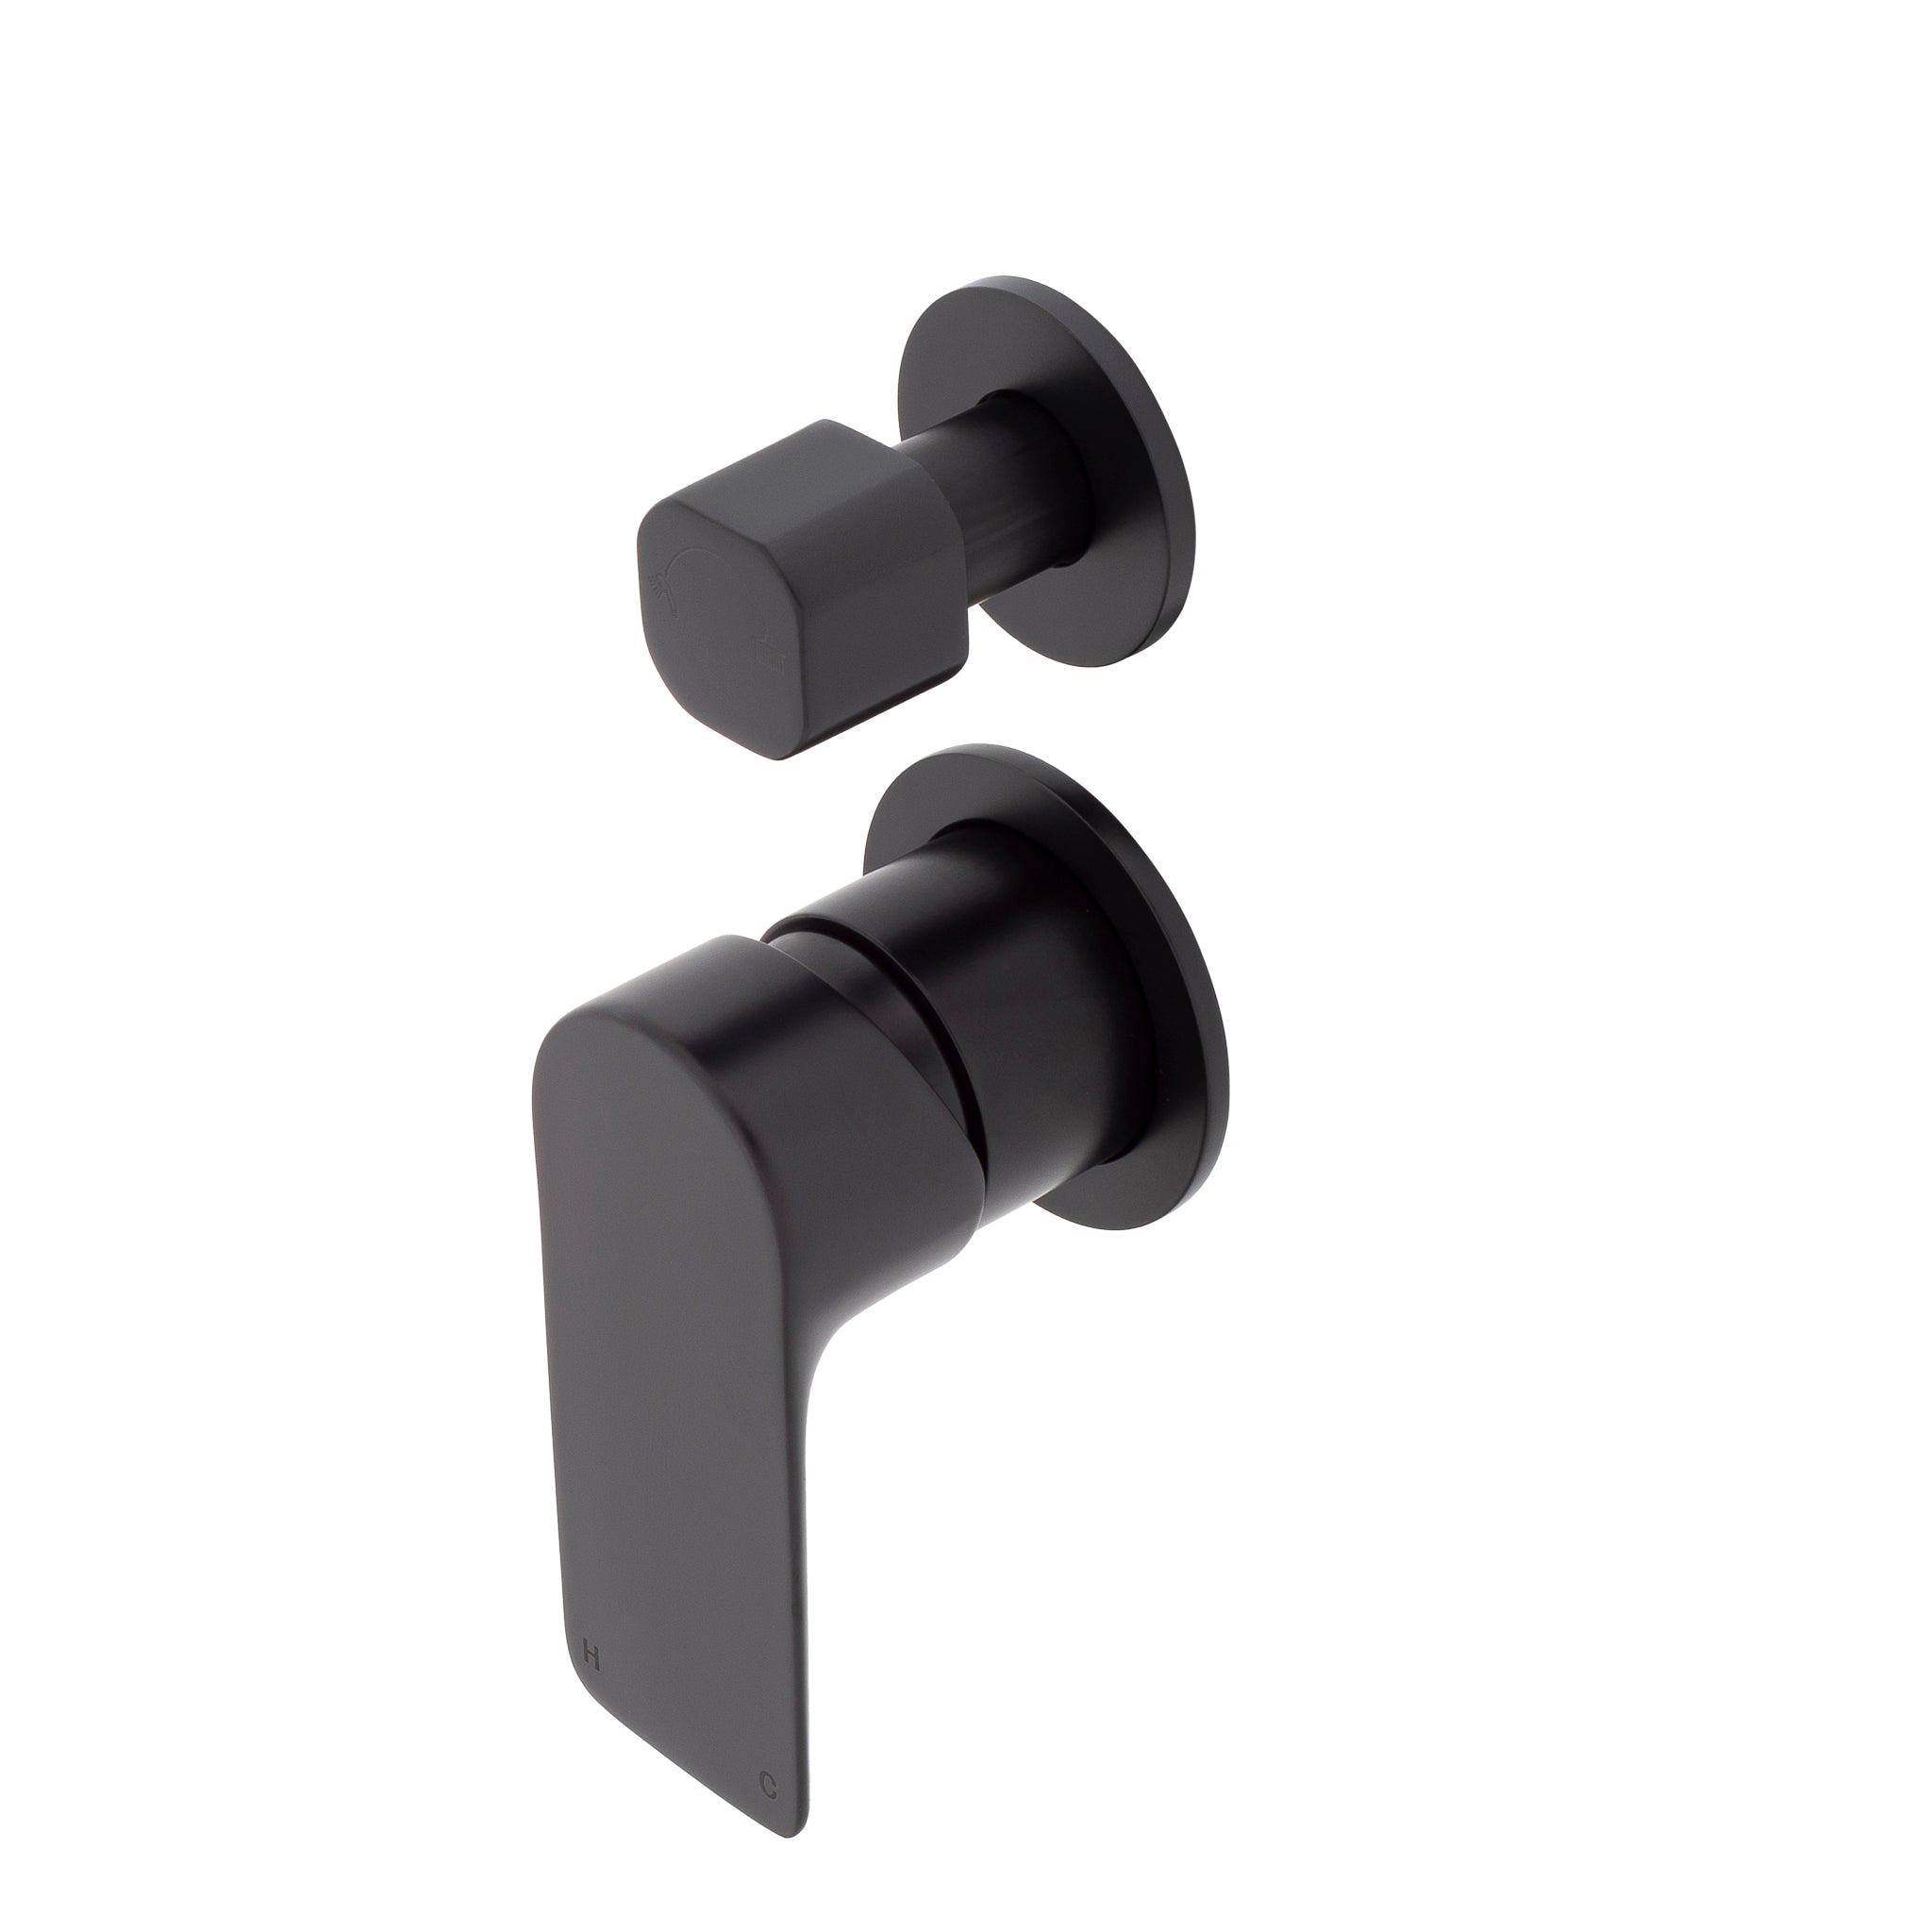 Jena Shower/ Bath Wall Mixer with Diverter and Round Plates, Matte Black